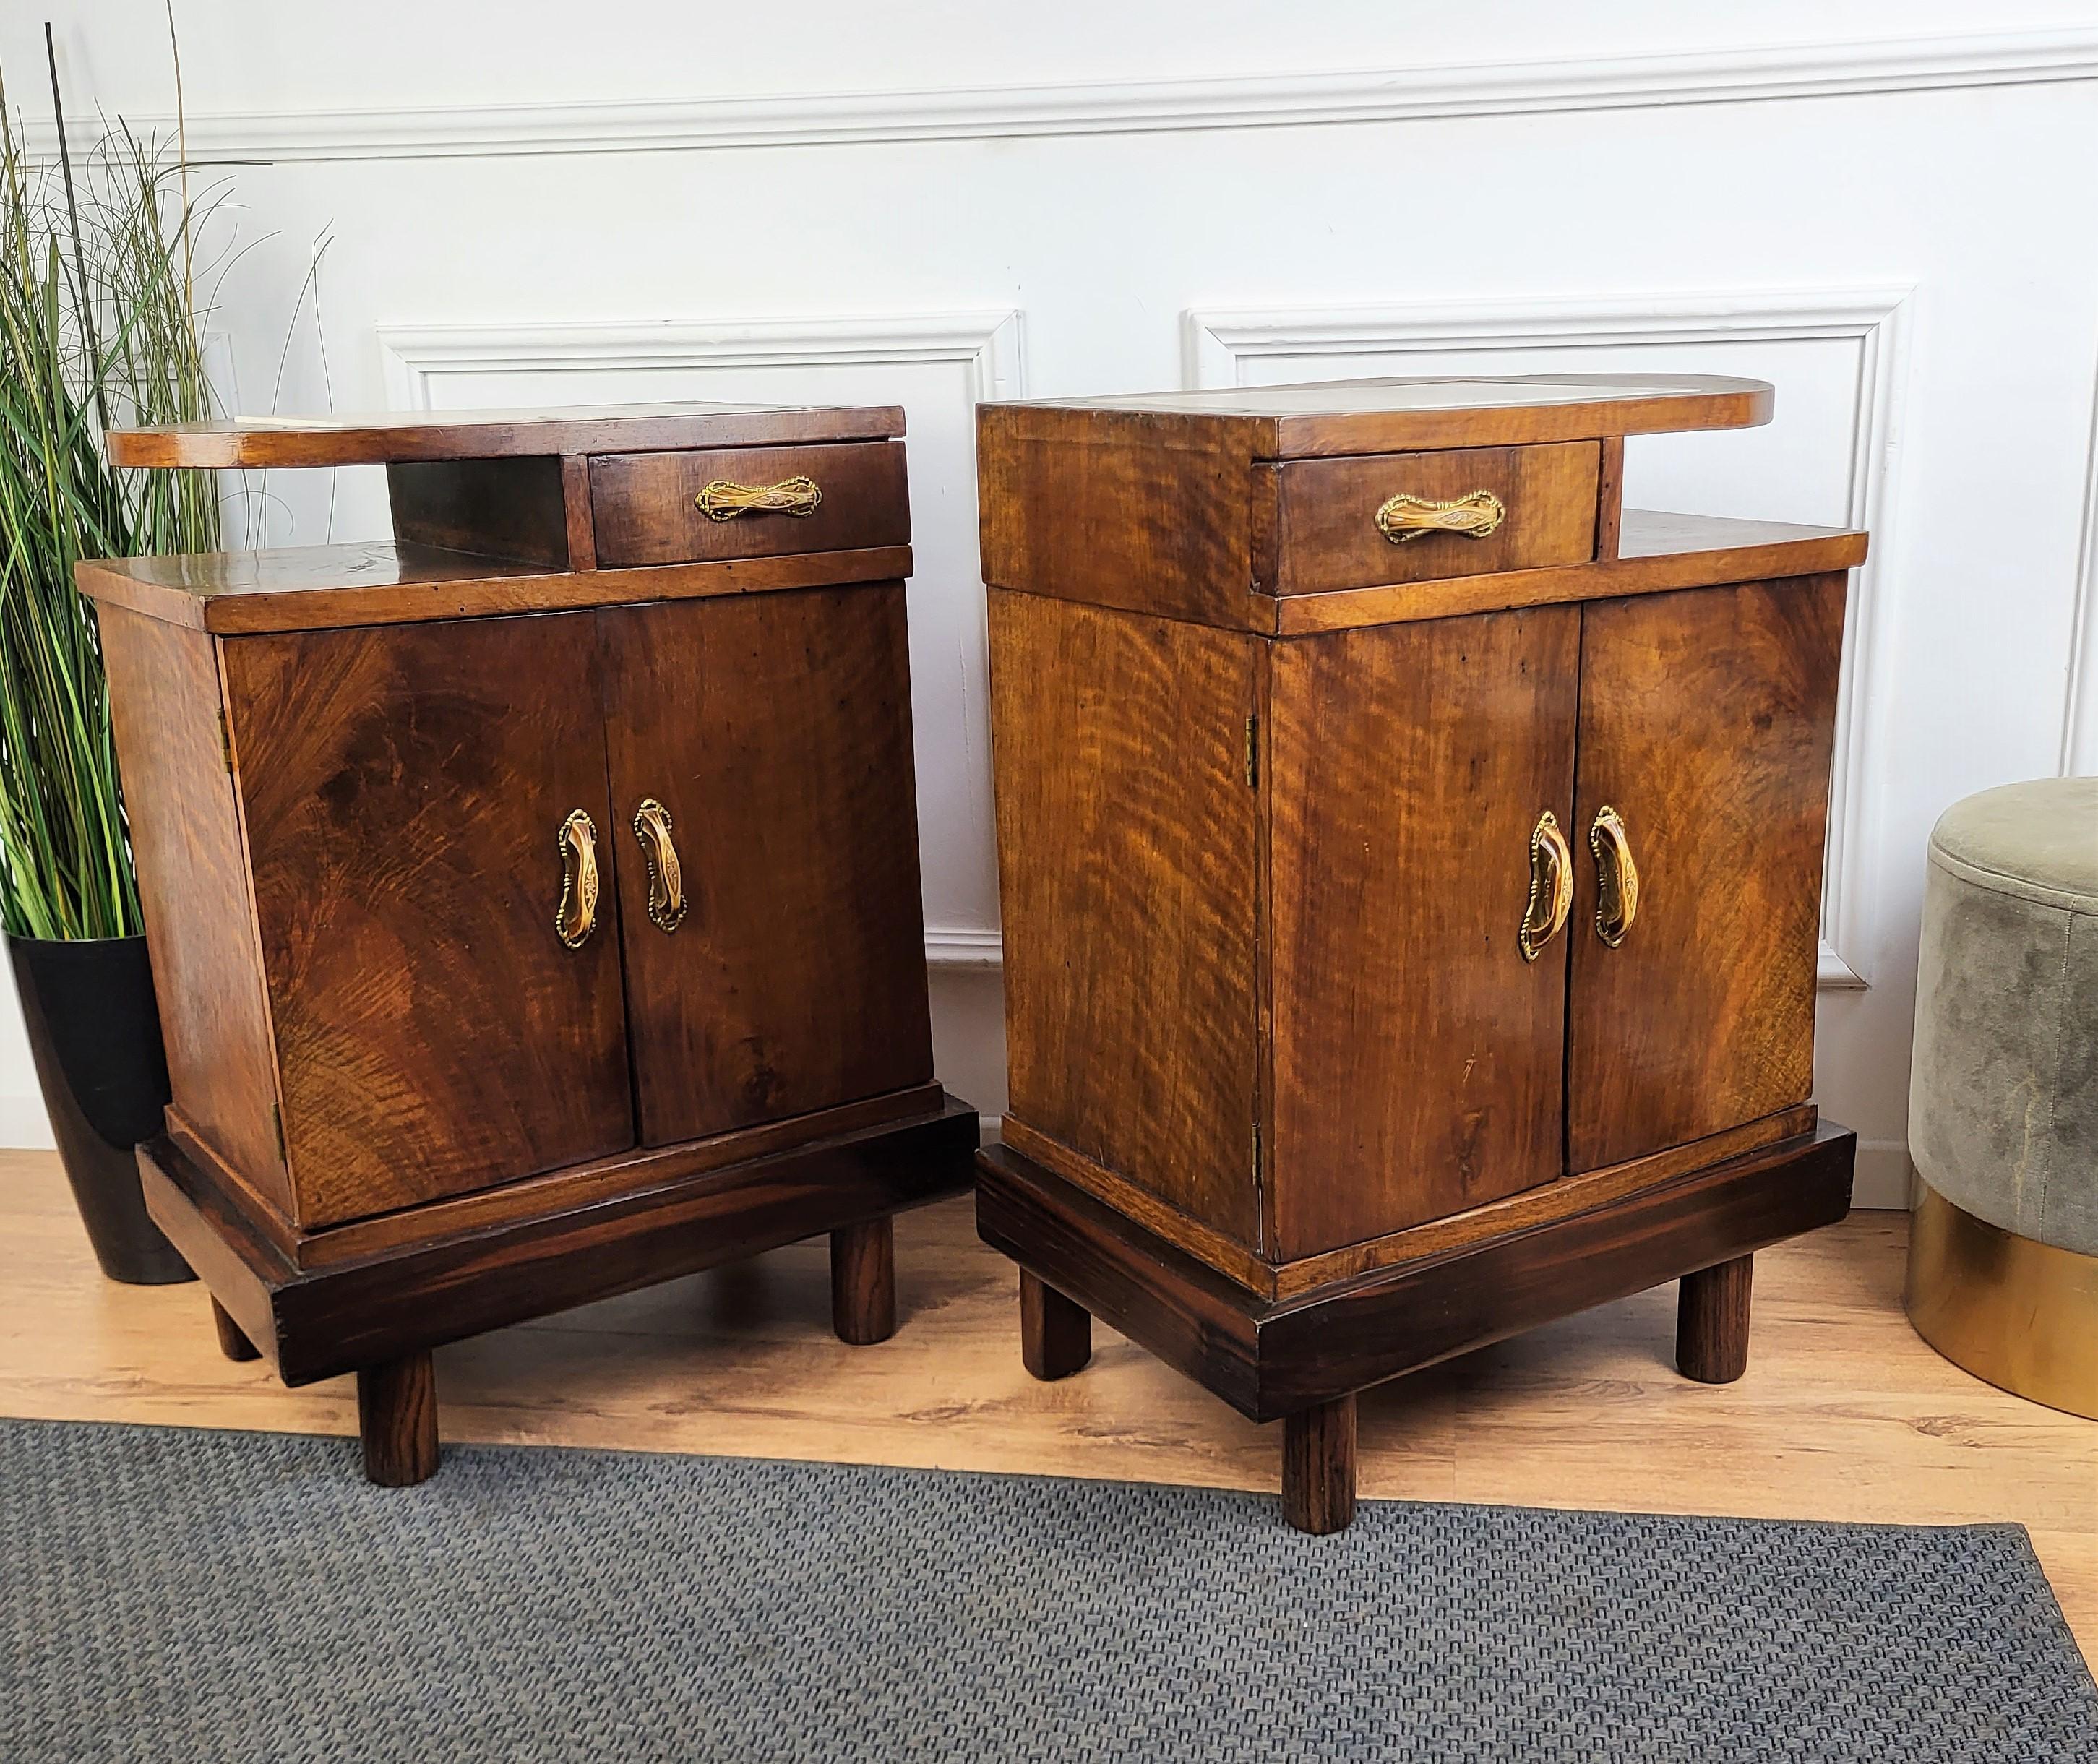 Brass Pair of Italian Art Deco Nightstand bedside Tables in Burl Walnut and Marble Top